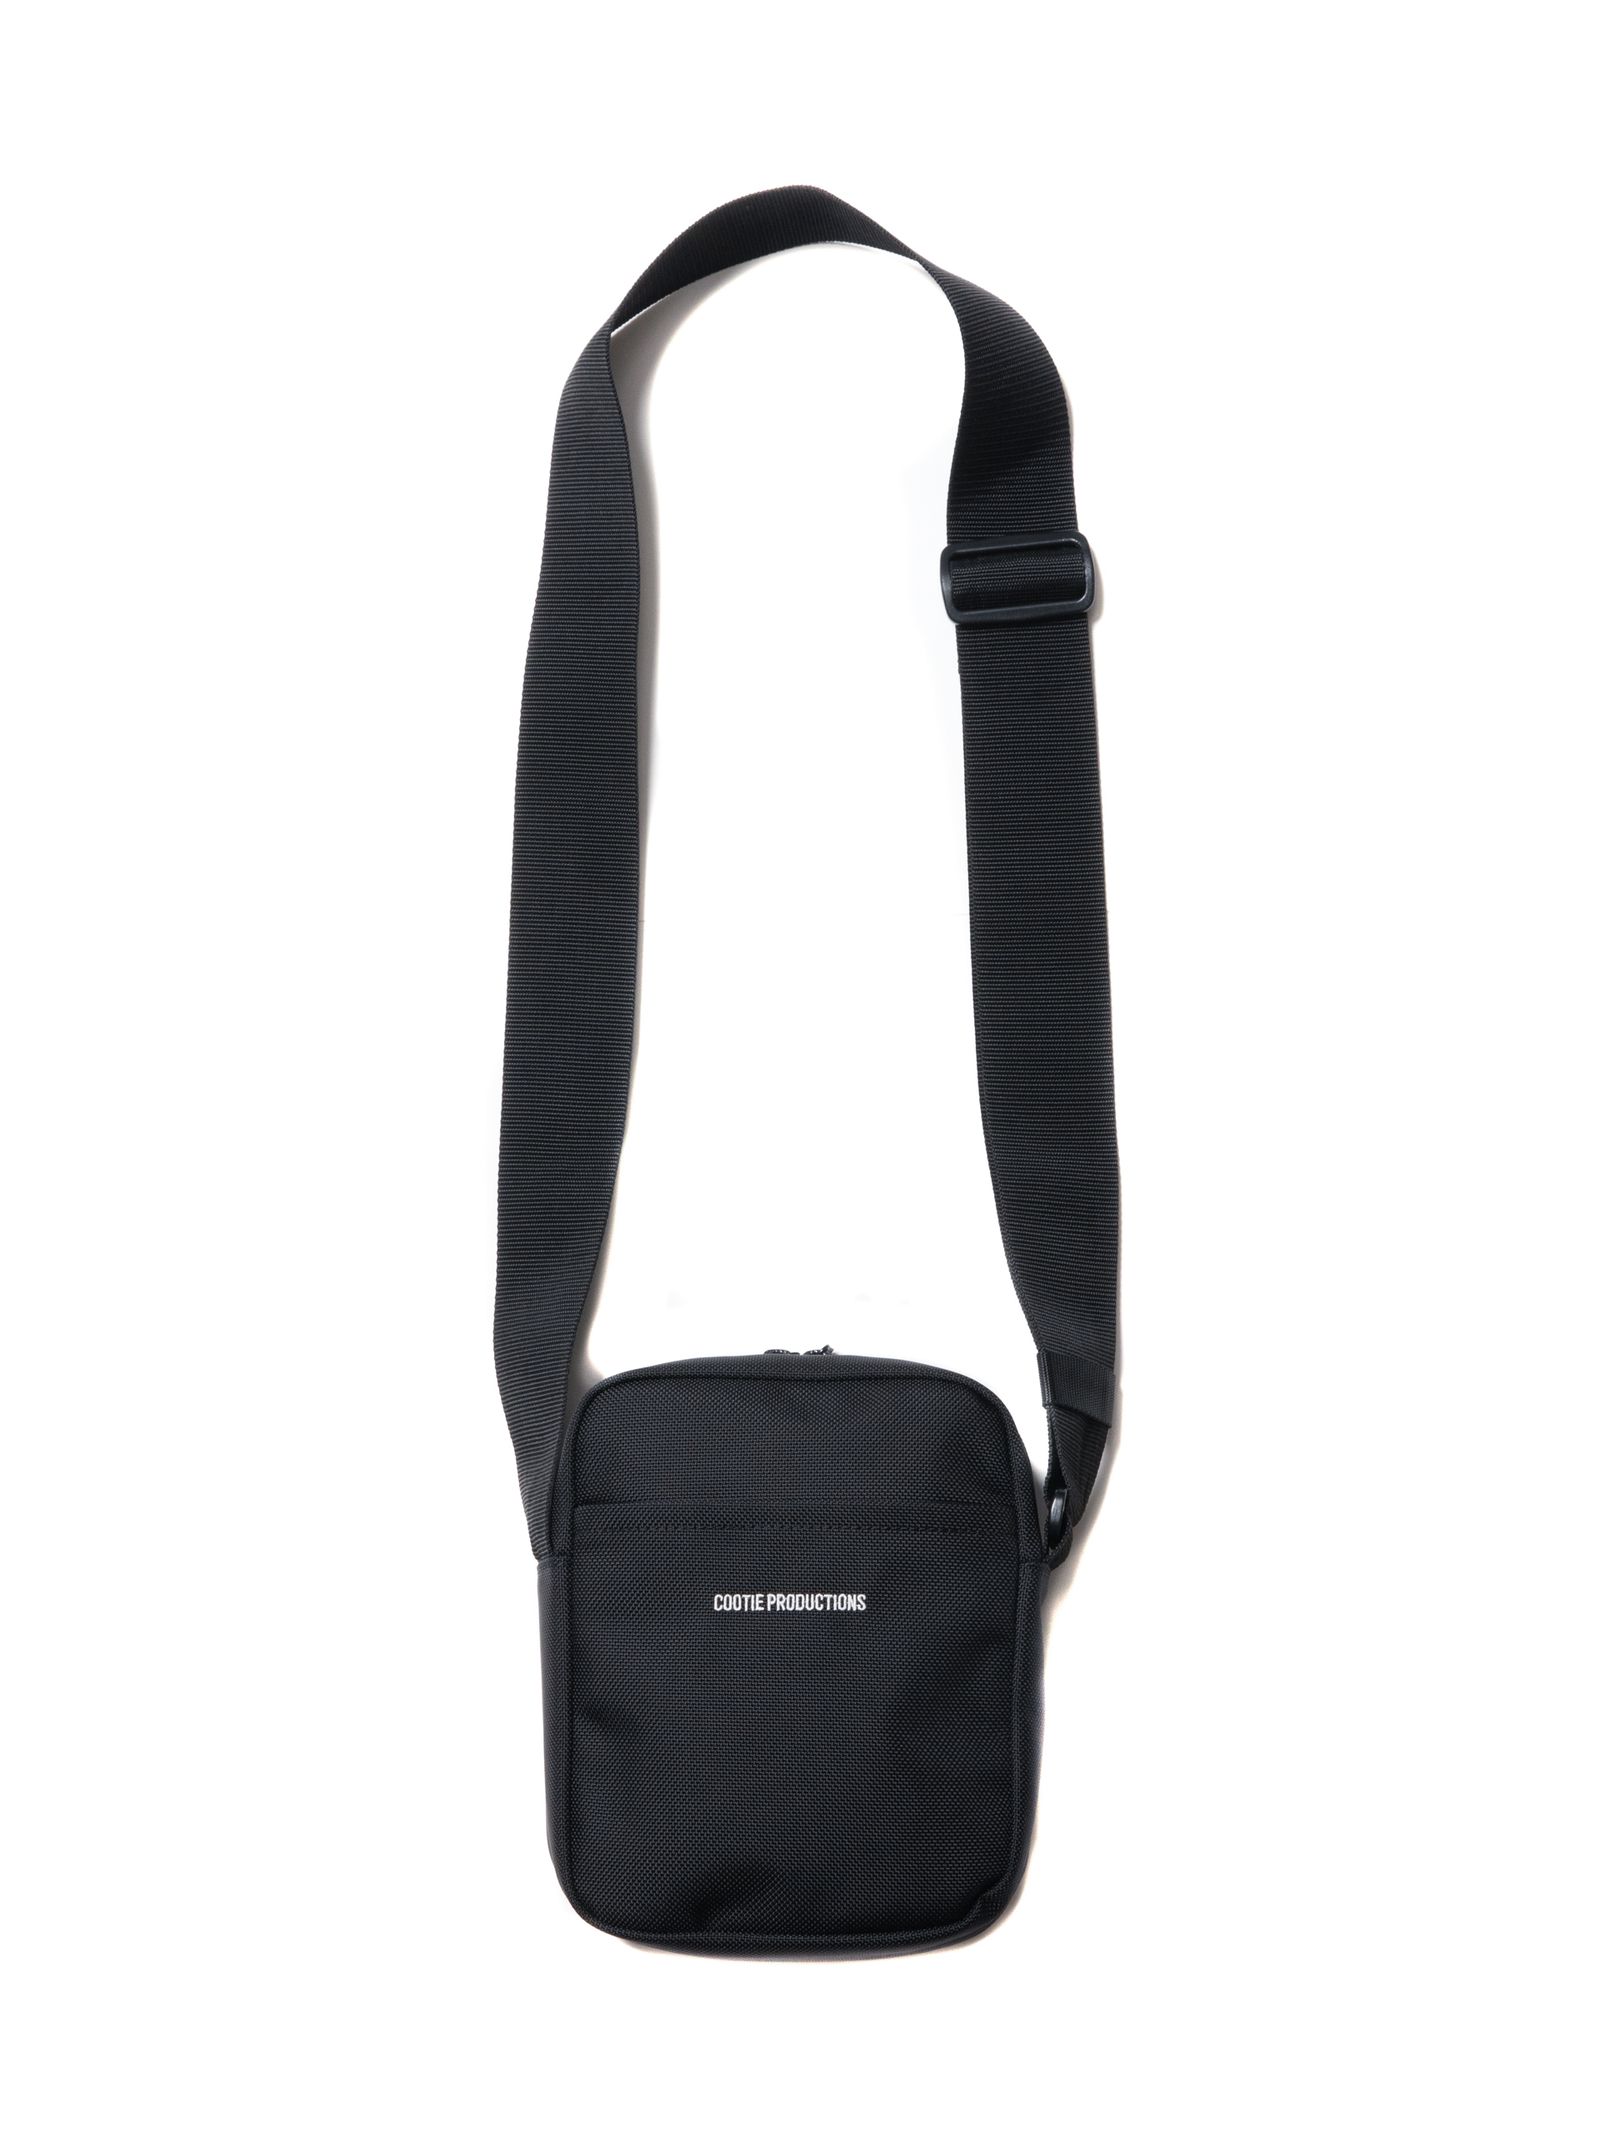 COOTIE PRODUCTIONS - Compact Shoulder Bag (BLACK) / コンパクト